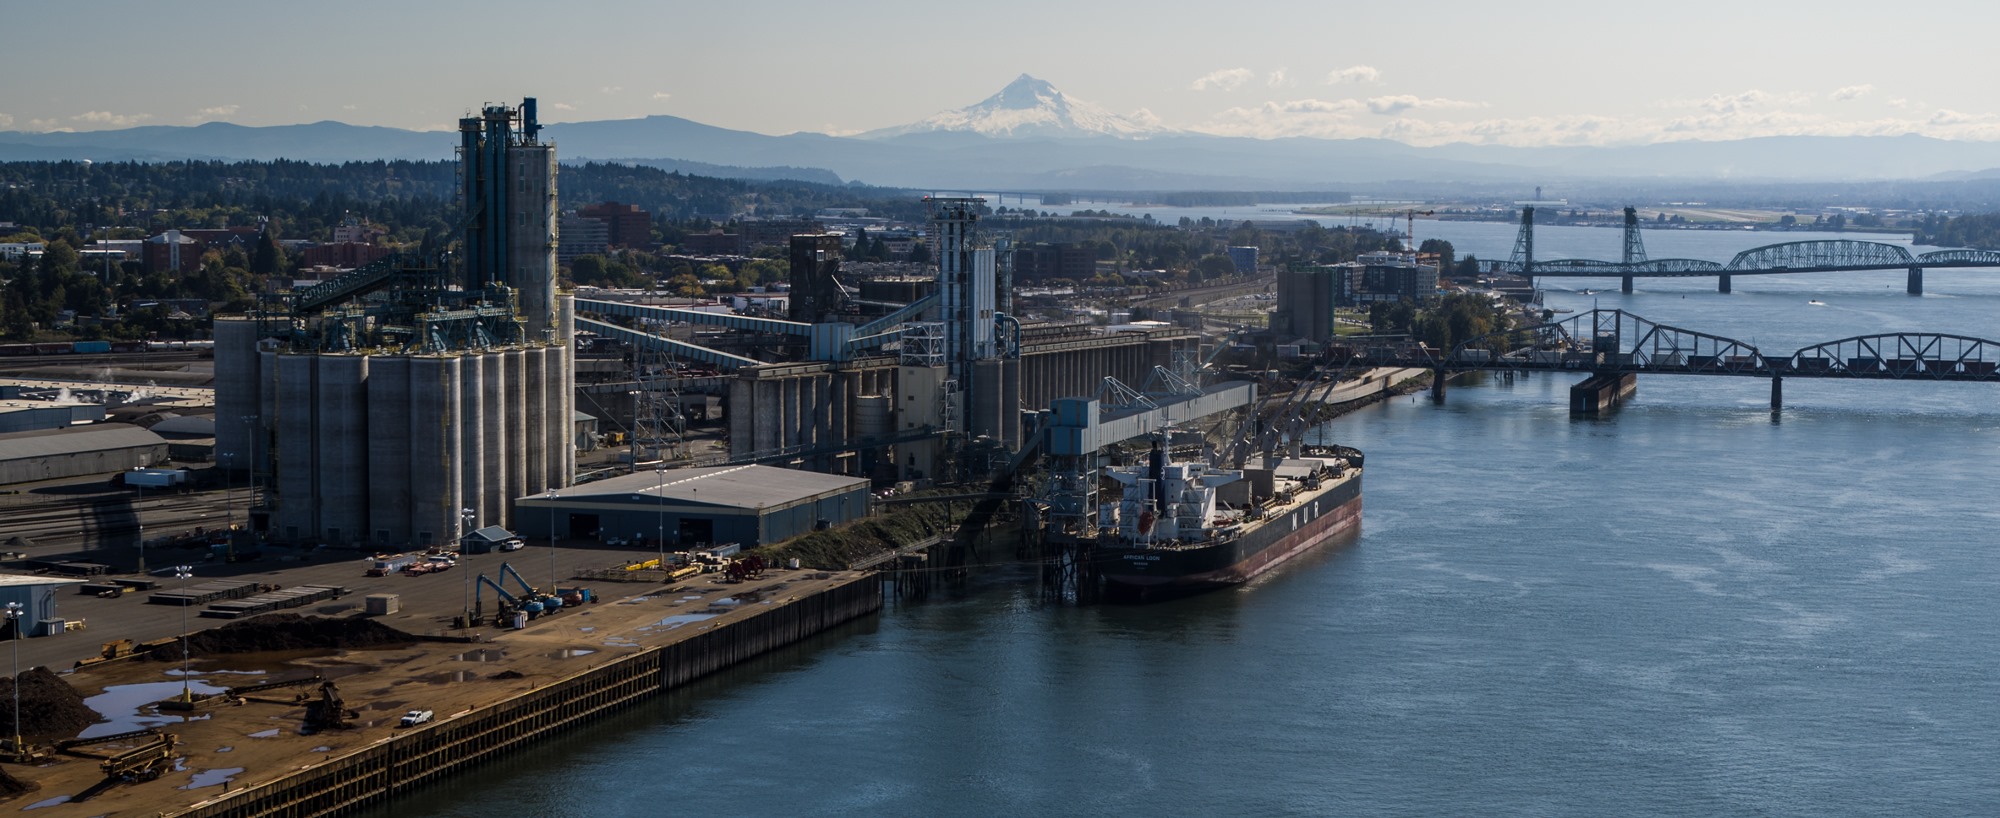 Photo of an export grain elevator in the Pacific Northwest on the Columbia River.